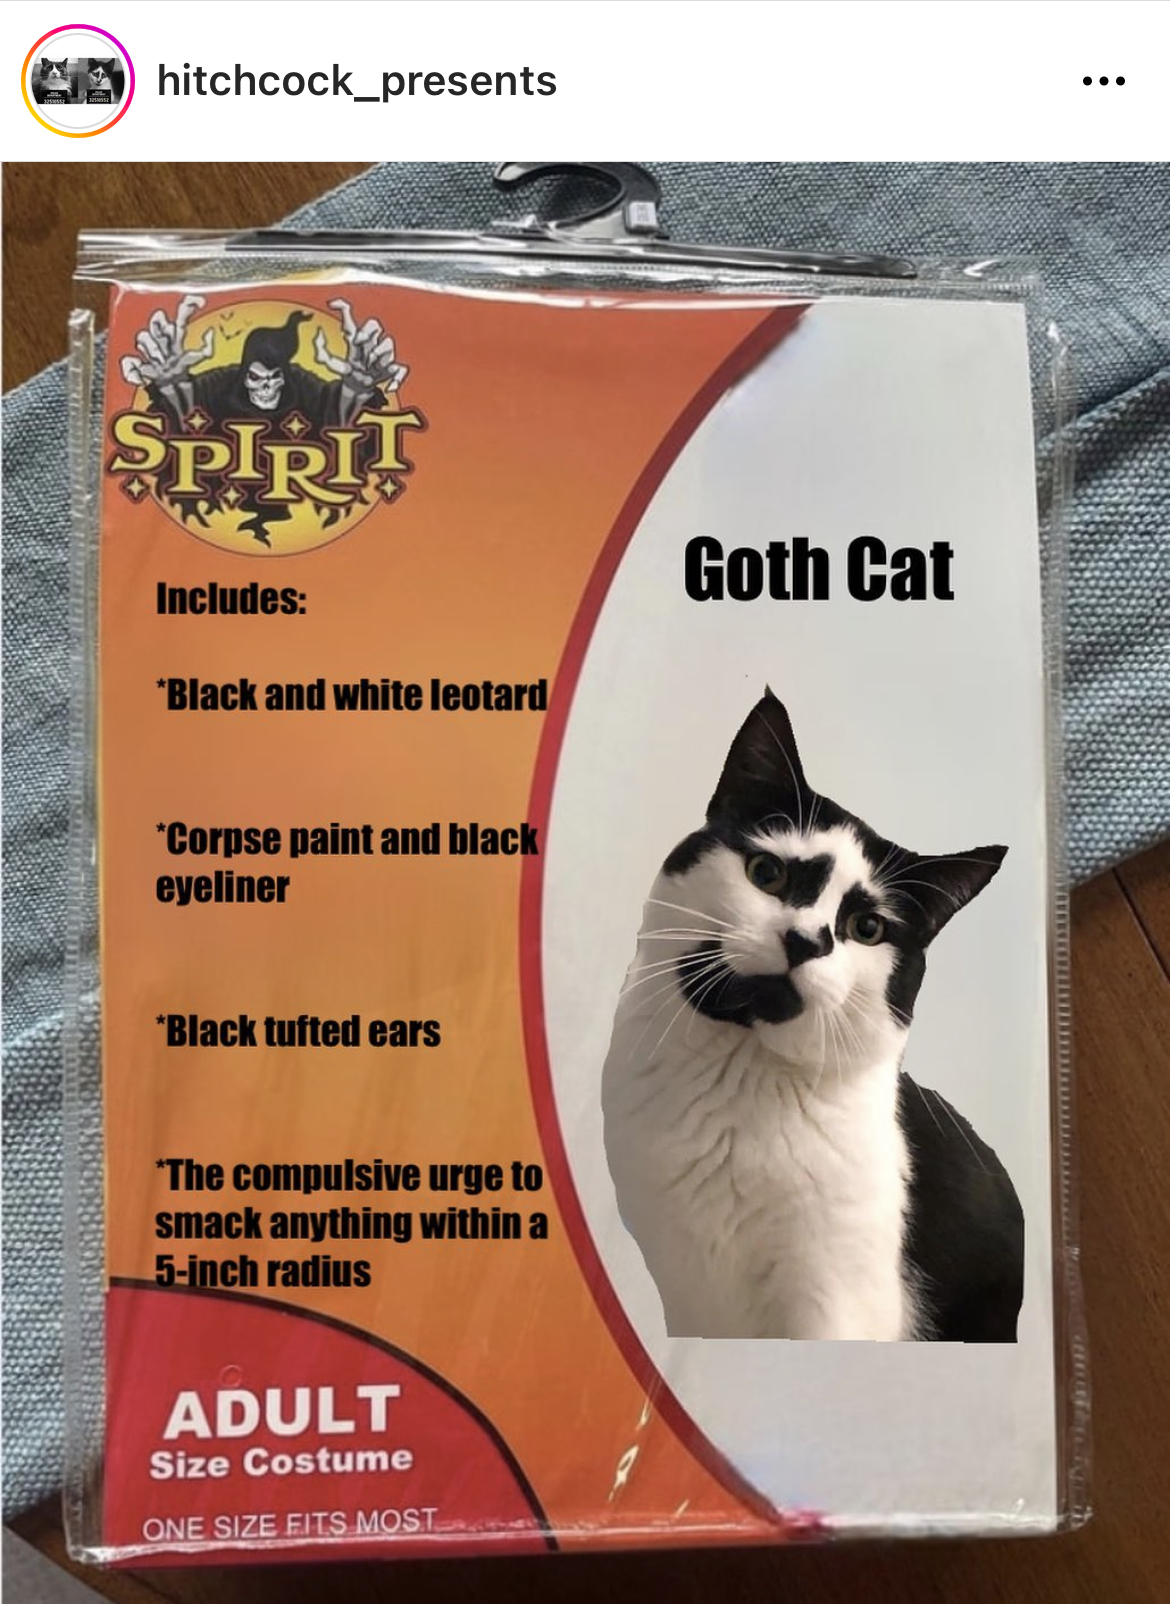 Costume Memes - spirit halloween - hitchcock presents Spirit Includes Black and white leotard Corpse paint and black eyeliner 'Black tufted ears The compulsive urge to smack anything within a 5inch radius Adult Size Costume One Size Fits Most Goth Cat